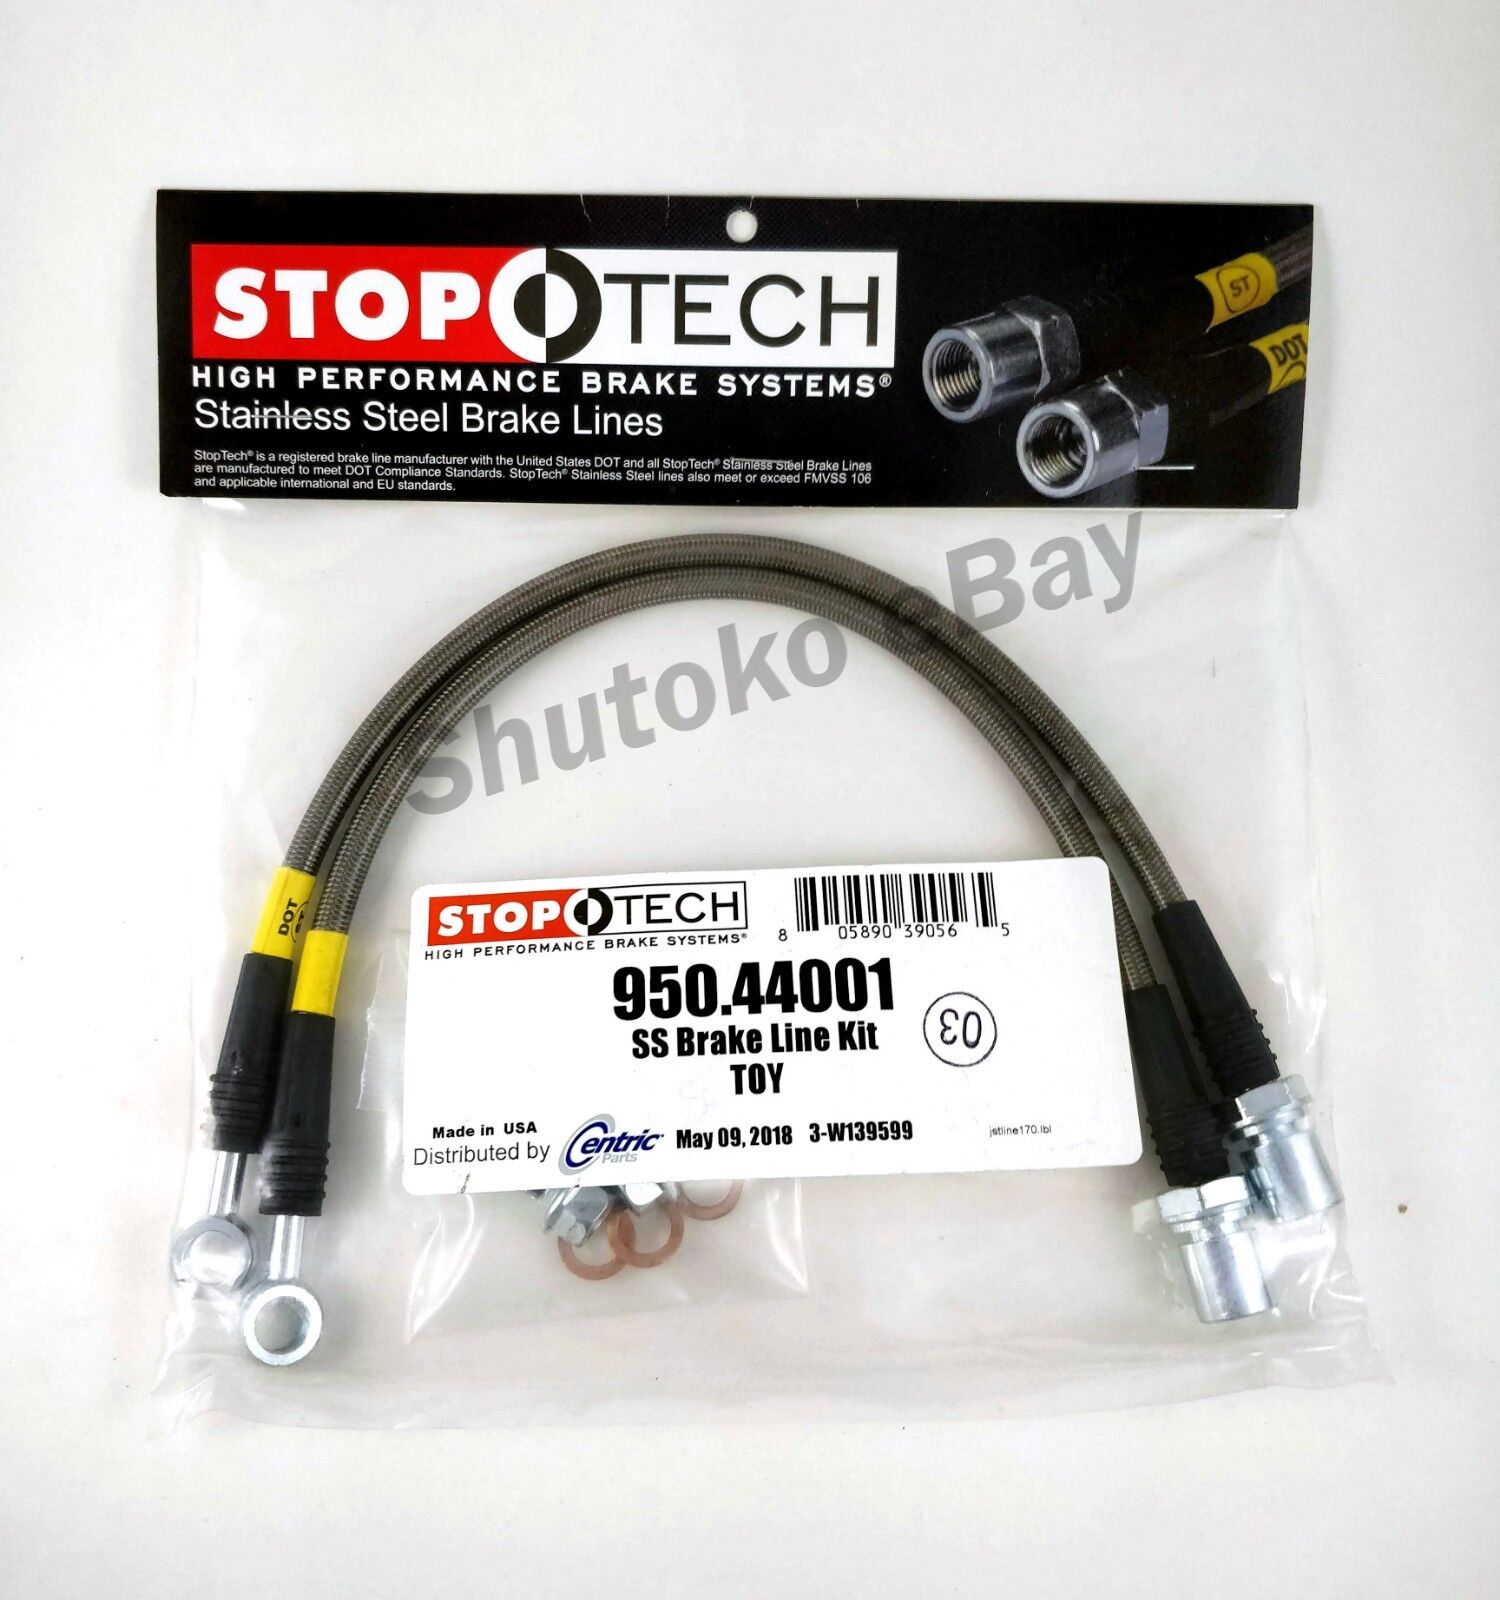 STOPTECH STAINLESS STEEL FRONT BRAKE LINES FOR 98-05 LEXUS GS300 / GS400 / GS430